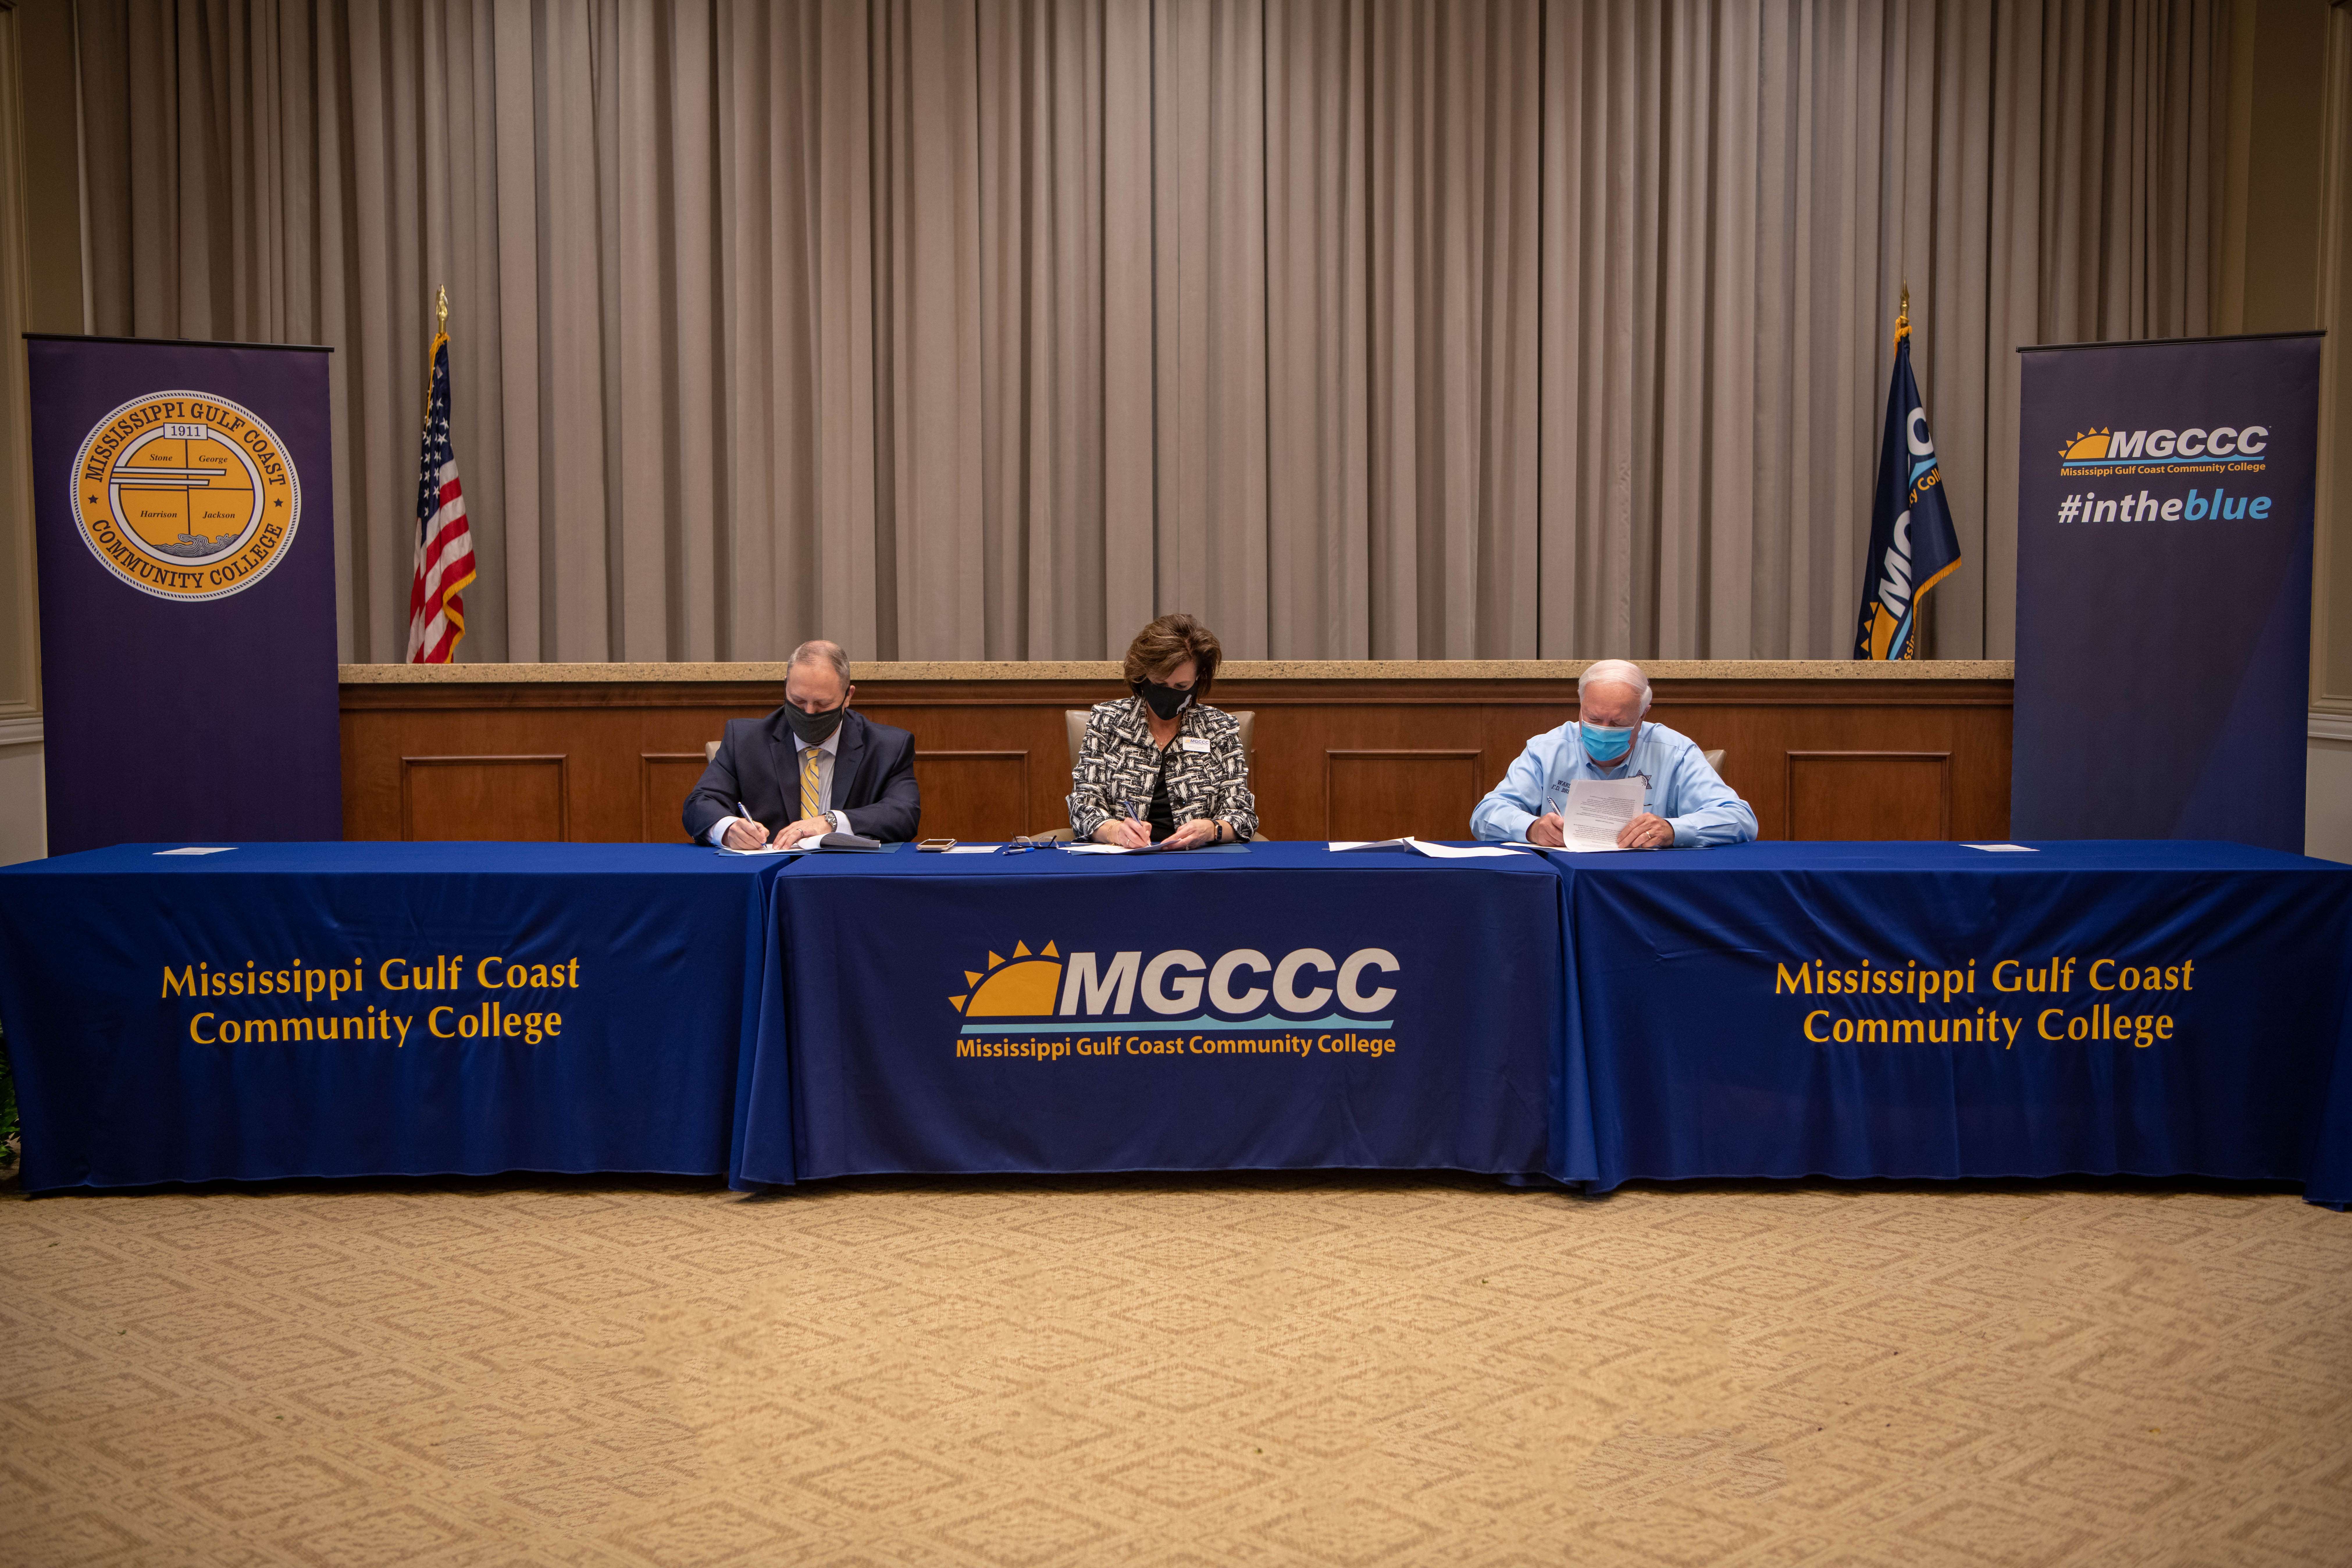 Signing the agreement, from left, are Bobby Fairley, warden of the George County Regional Correctional Facility; Dr. Mary S. Graham, MGCCC president; and Dwain Brewer, warden of the Stone County Regional Correctional Facility. 